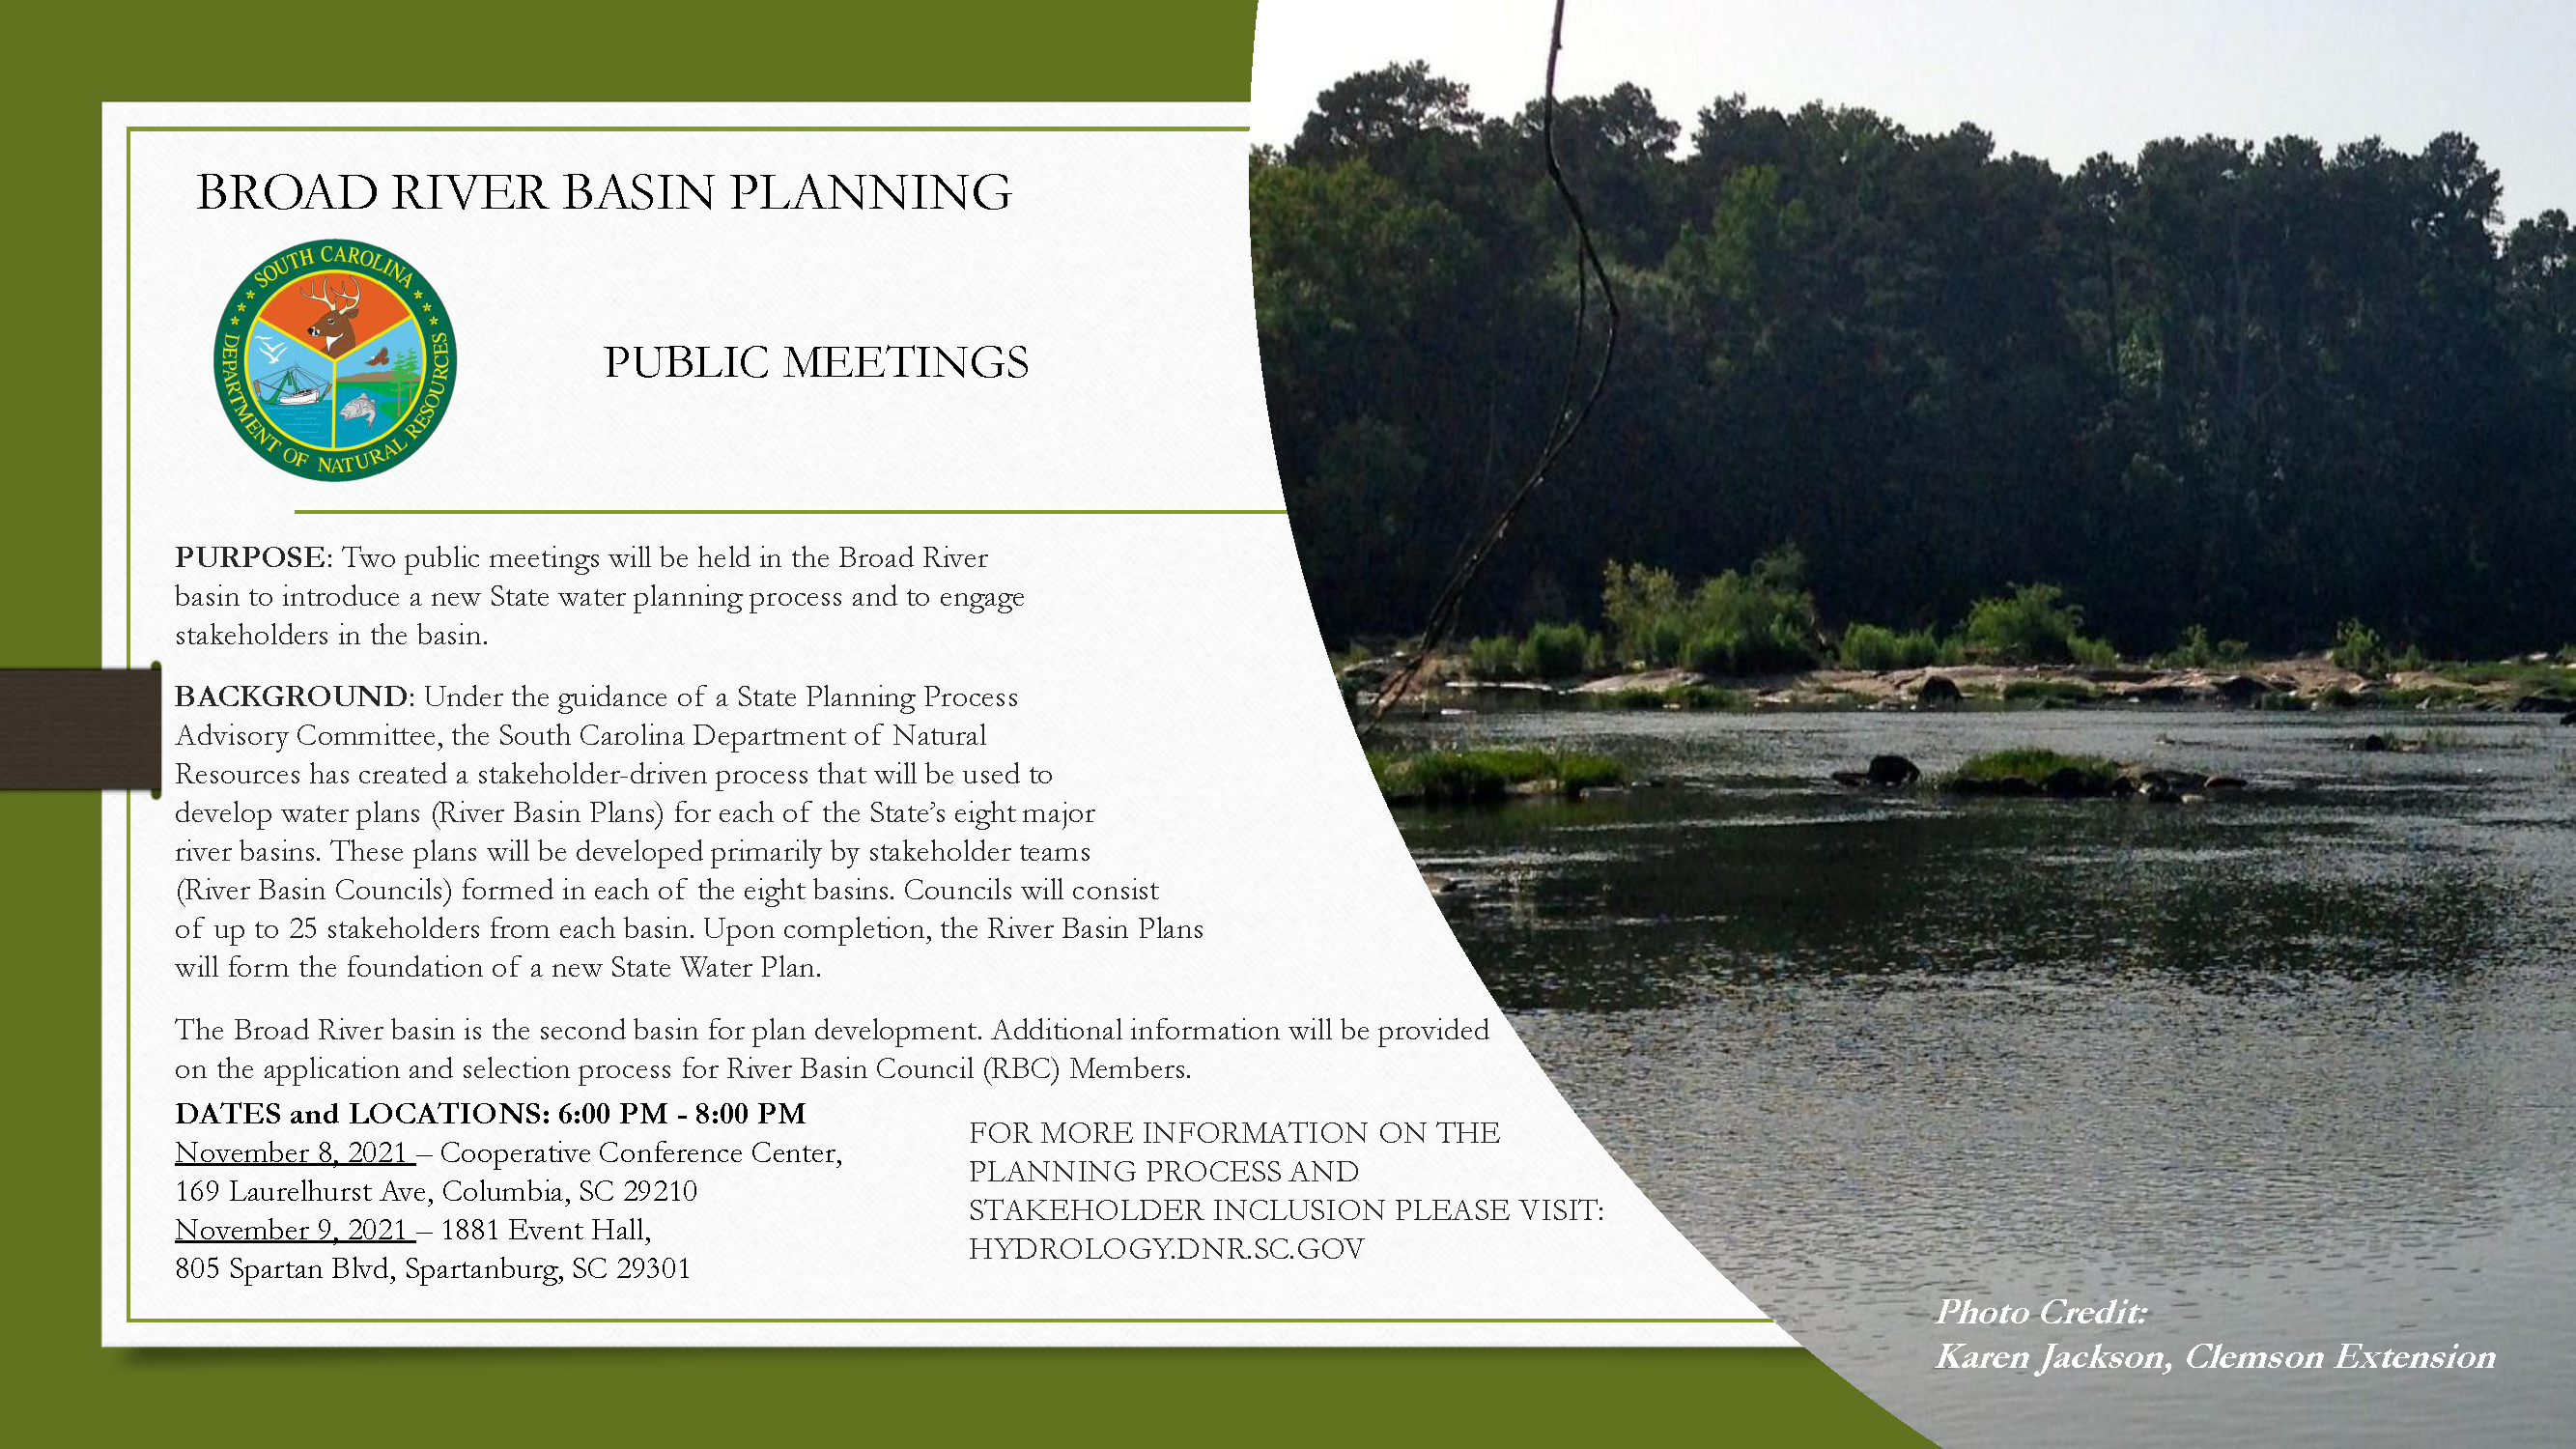 Click Image to Download Broad River Basin Public Meetings Ad